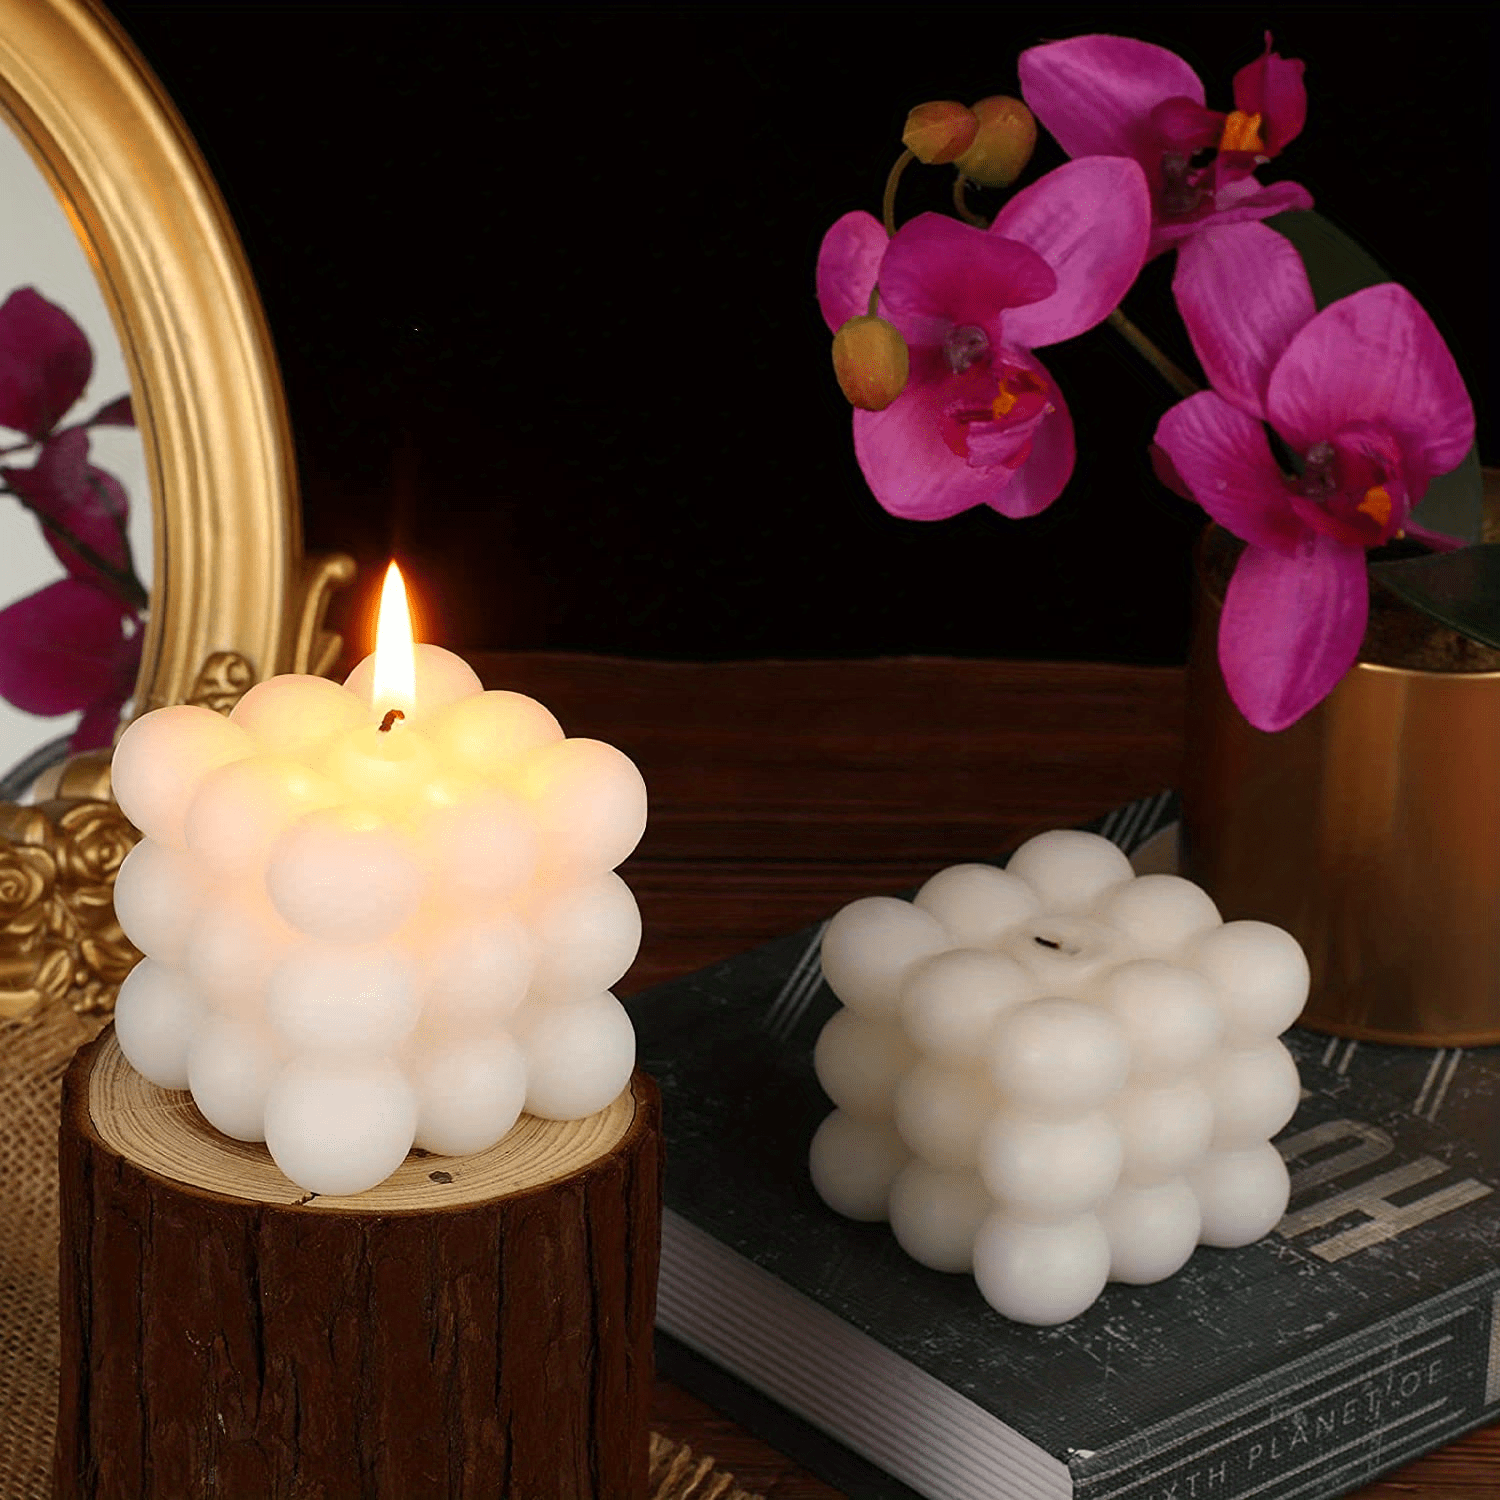 Loftern White Freesia Scented Bubble Candle - Handmade, Natural Soy Wax Based, Uniquely Aesthetic Cool Shaped Candles